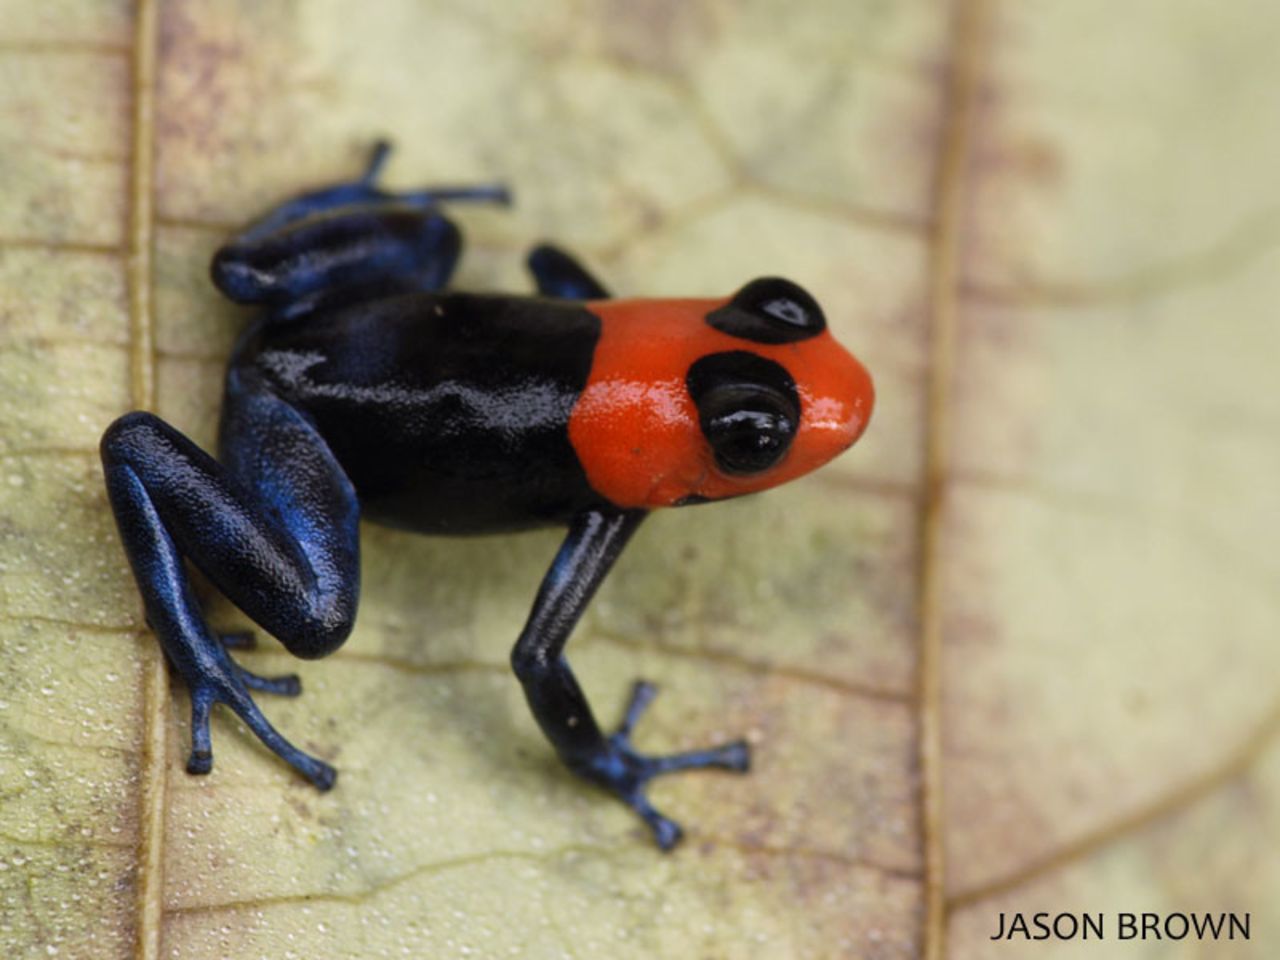 The blessed poison frog is currently listed as vulnerable, say the IUCN.